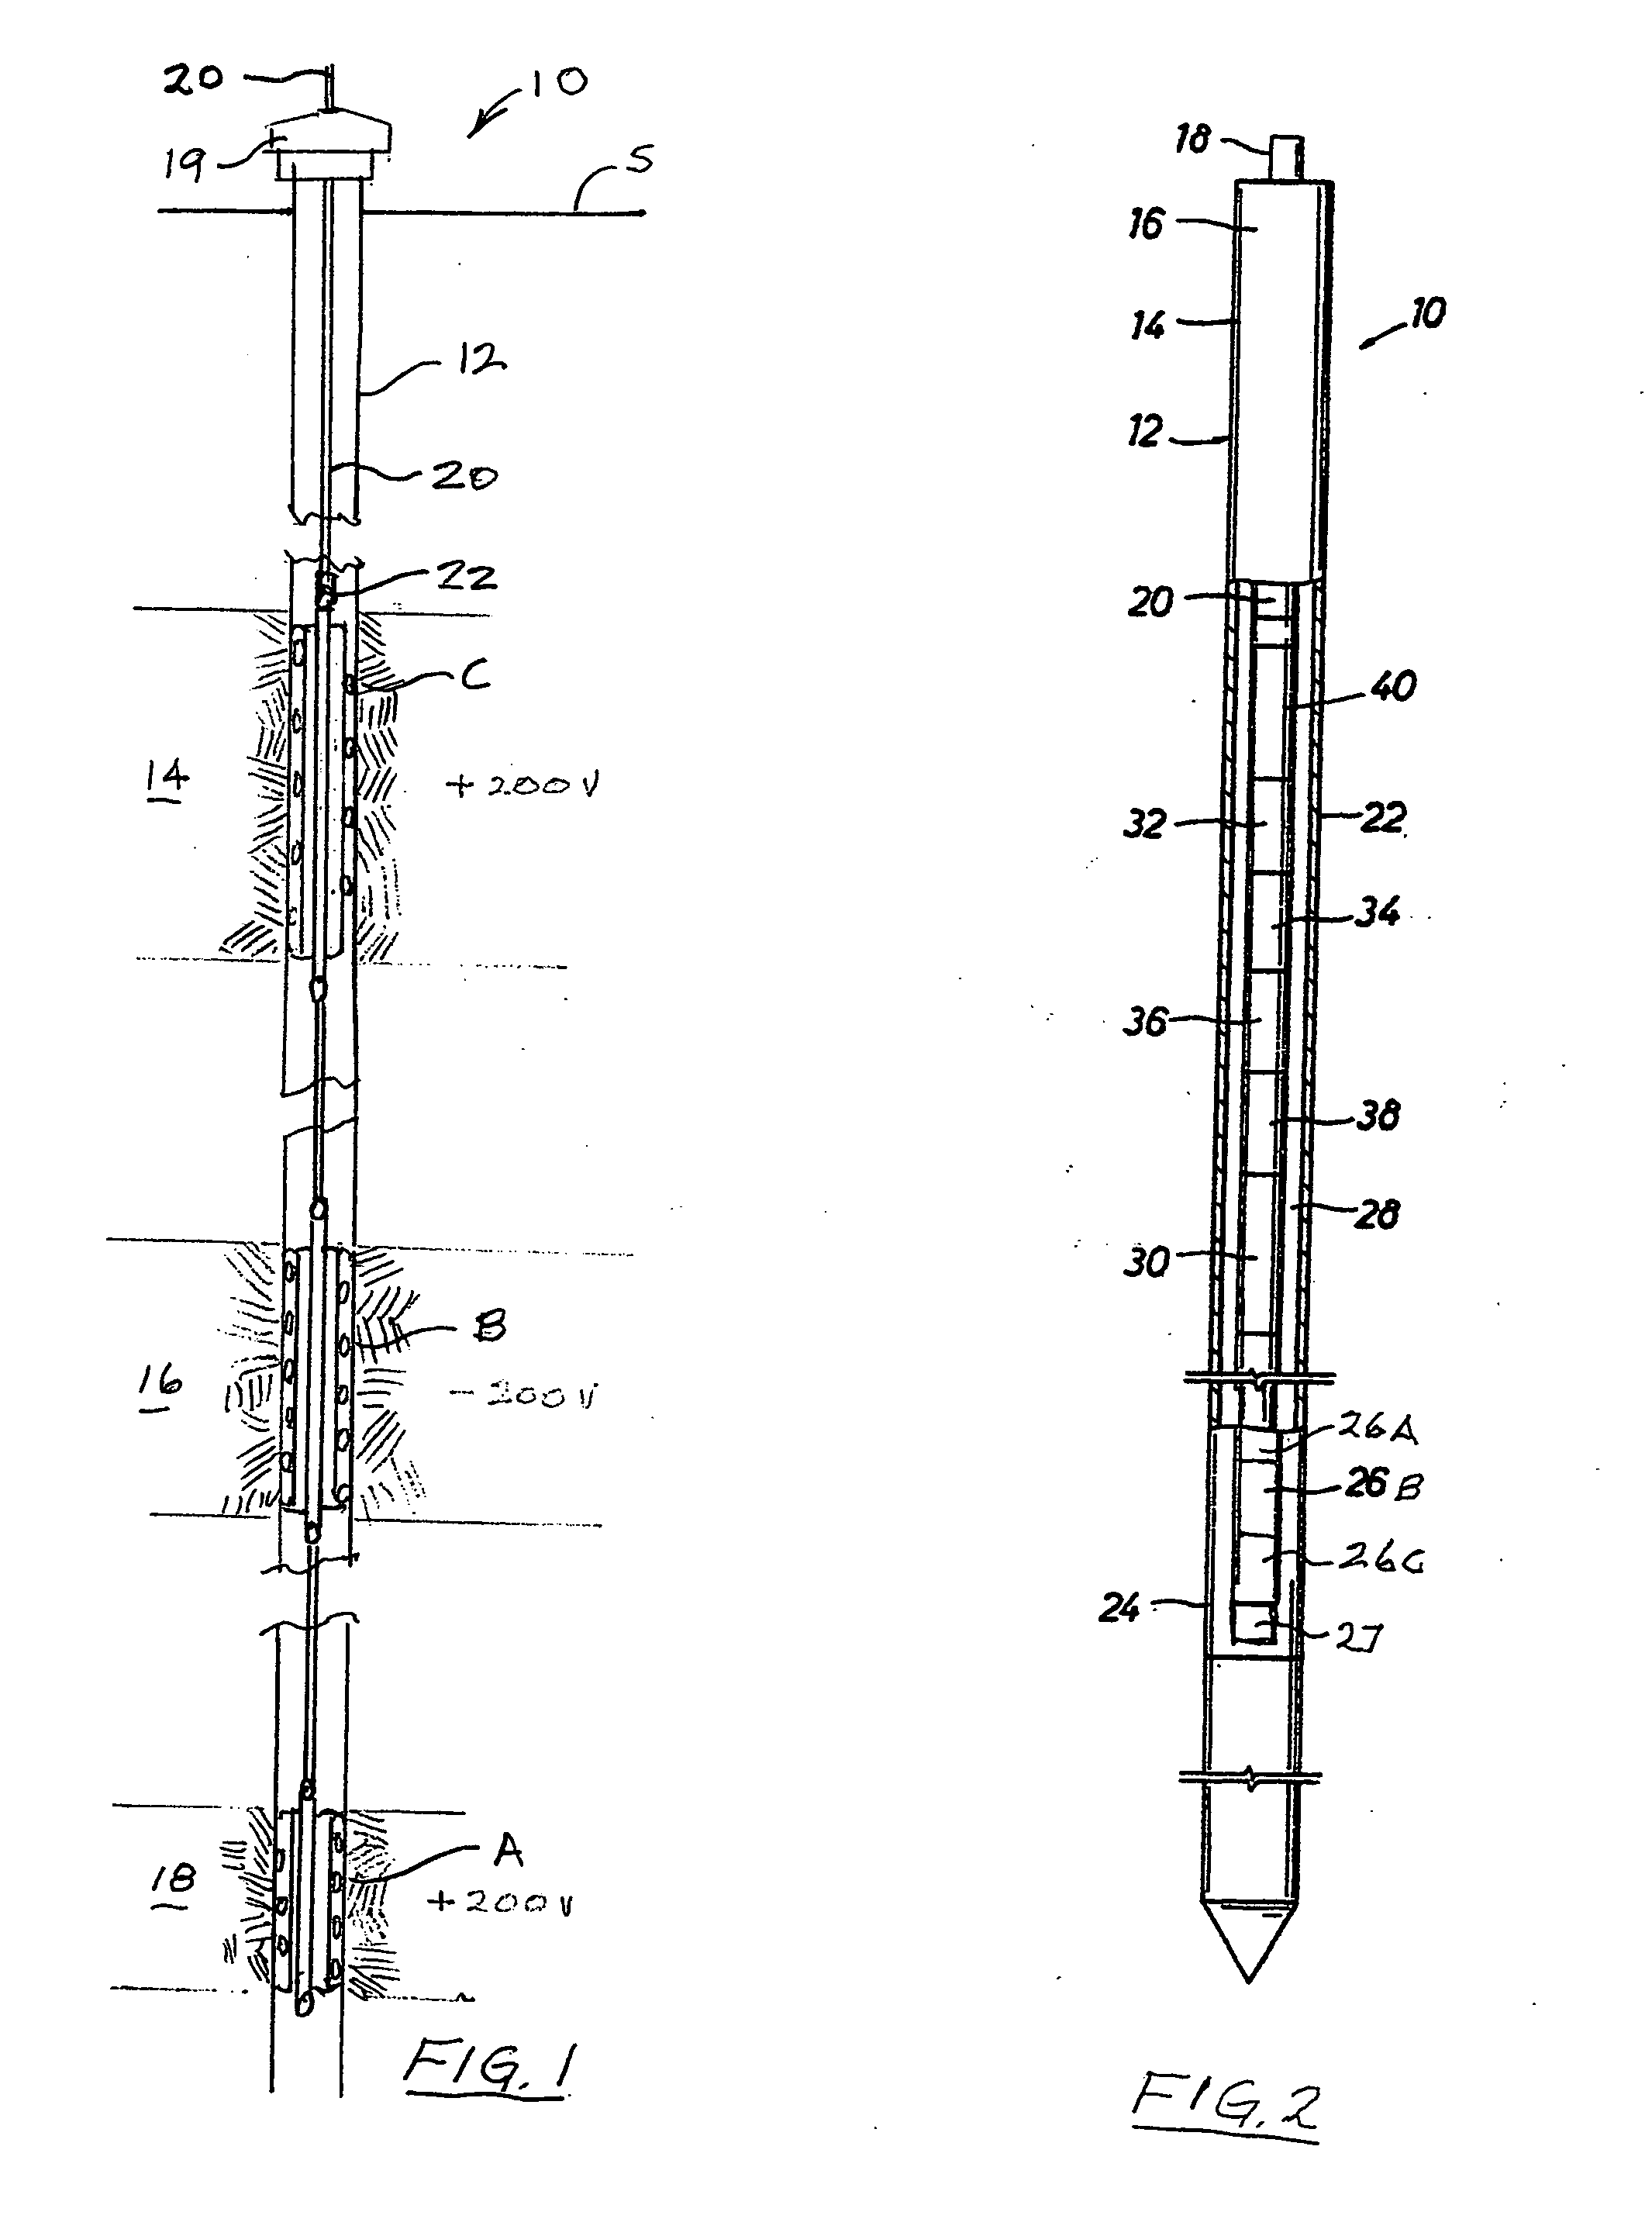 Electronic blast control system for multiple downhole operations